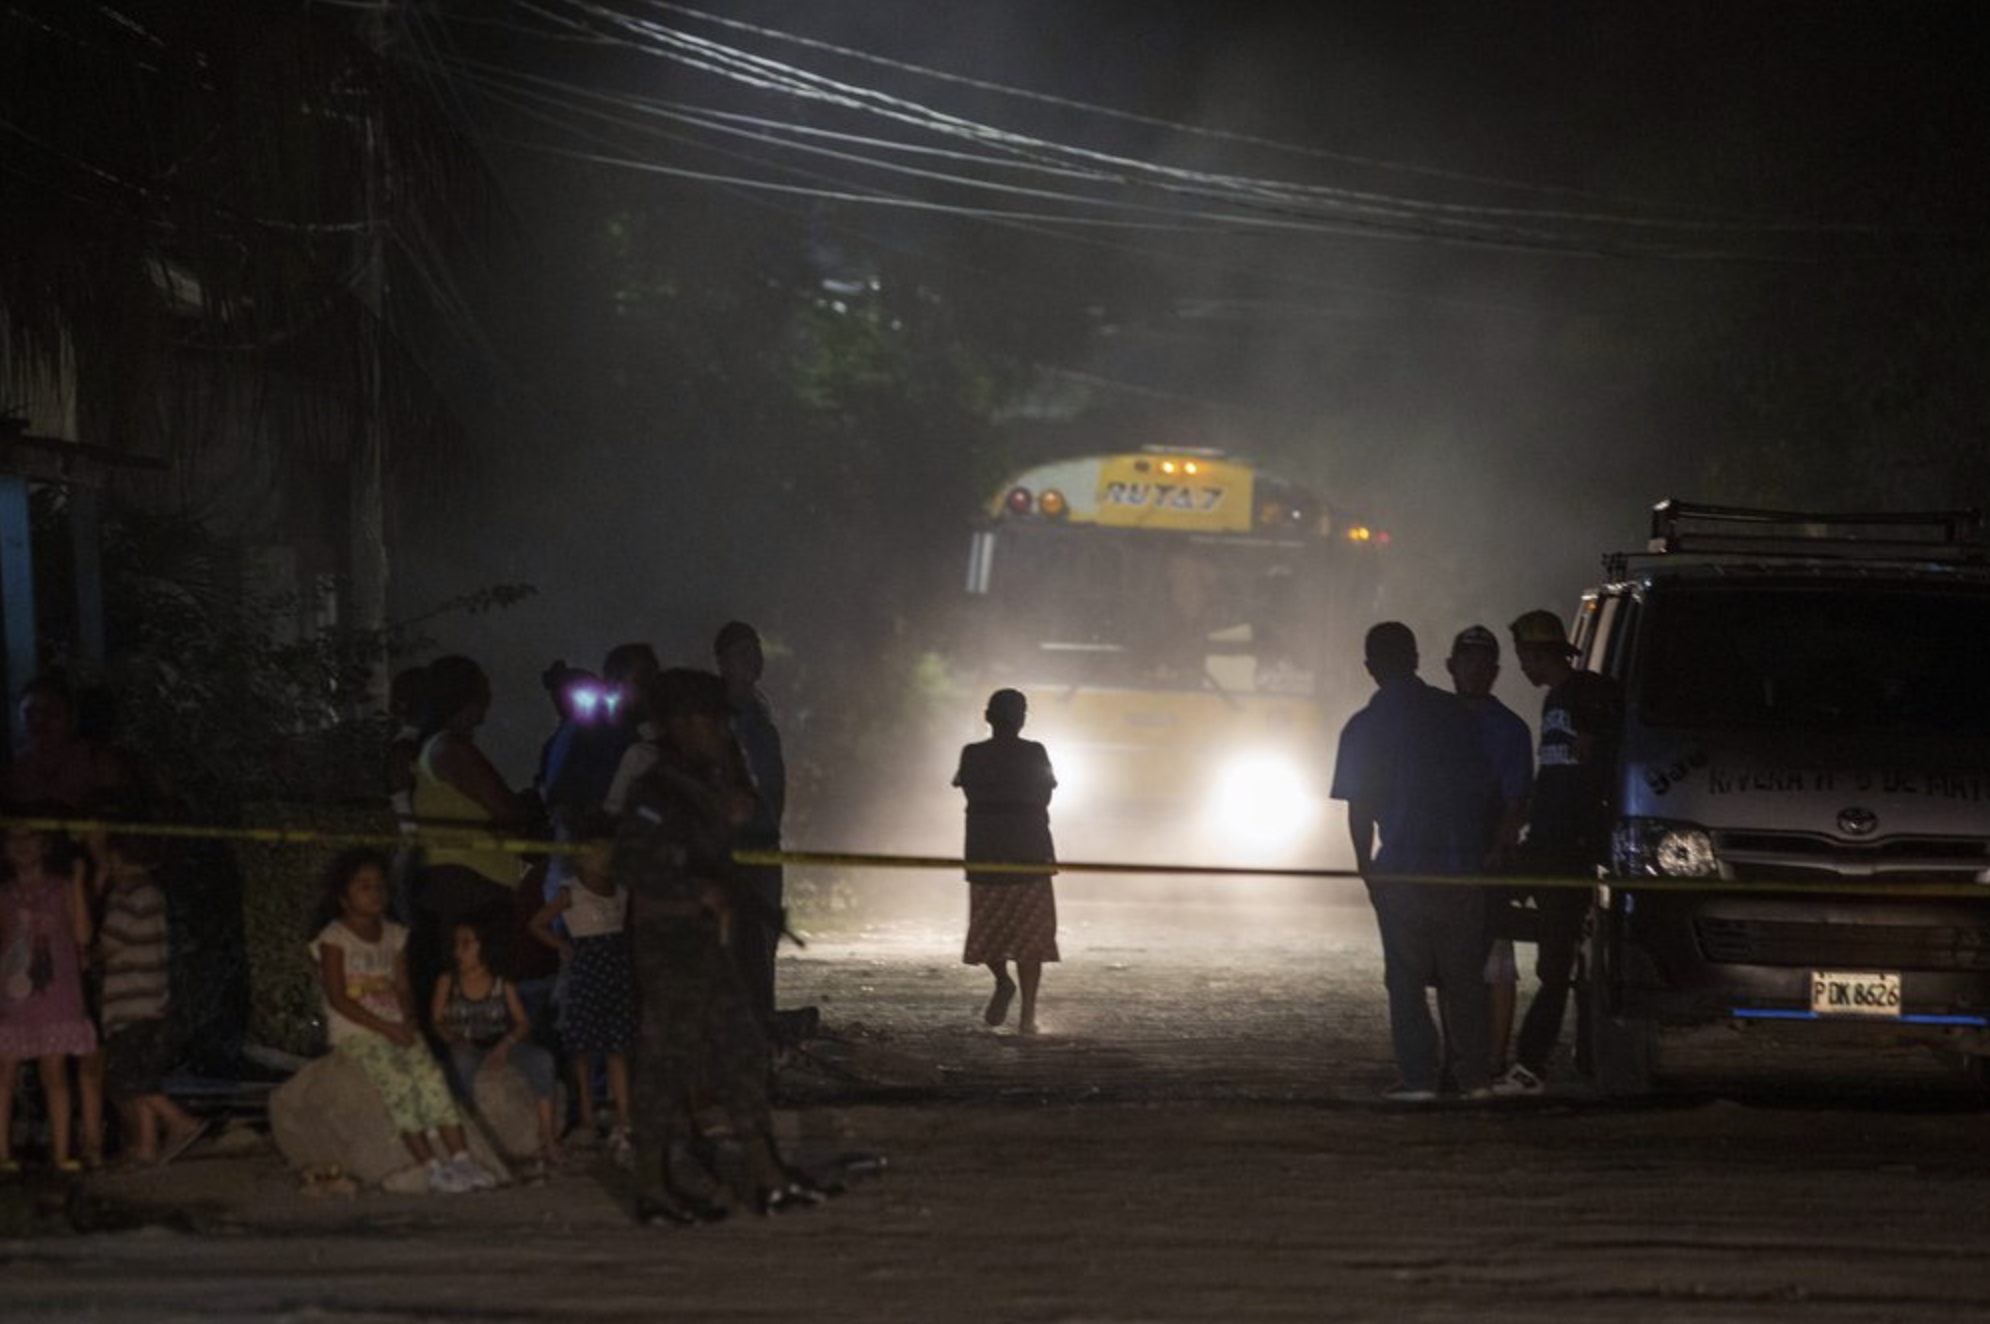 Neighbors watch as police and forensic workers inspect a body at a crime scene in the Rivera Hernandez neighborhood of San Pedro Sula, Honduras, on Nov. 30, 2019. Image by Moises Castillo/ AP Photo. Honduras, 2019.